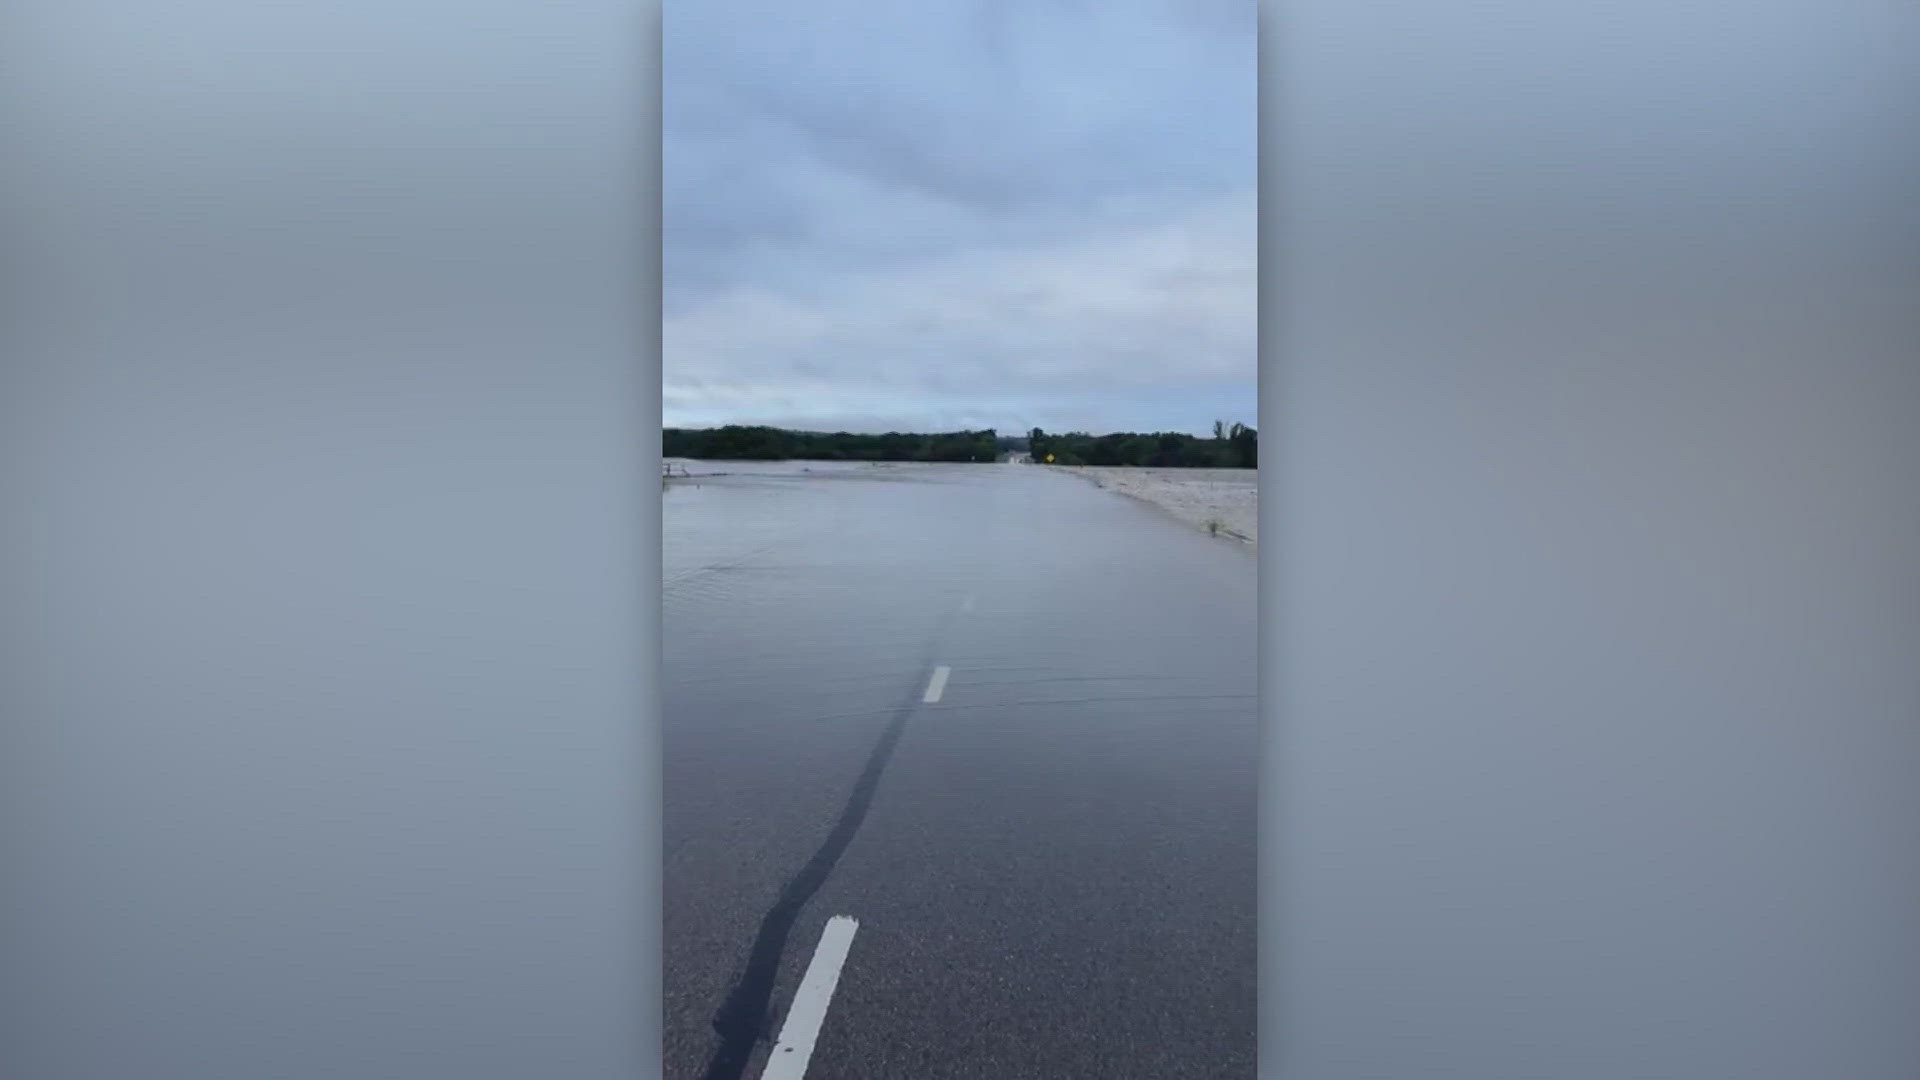 One town in Central Texas is surrounded by flood waters.